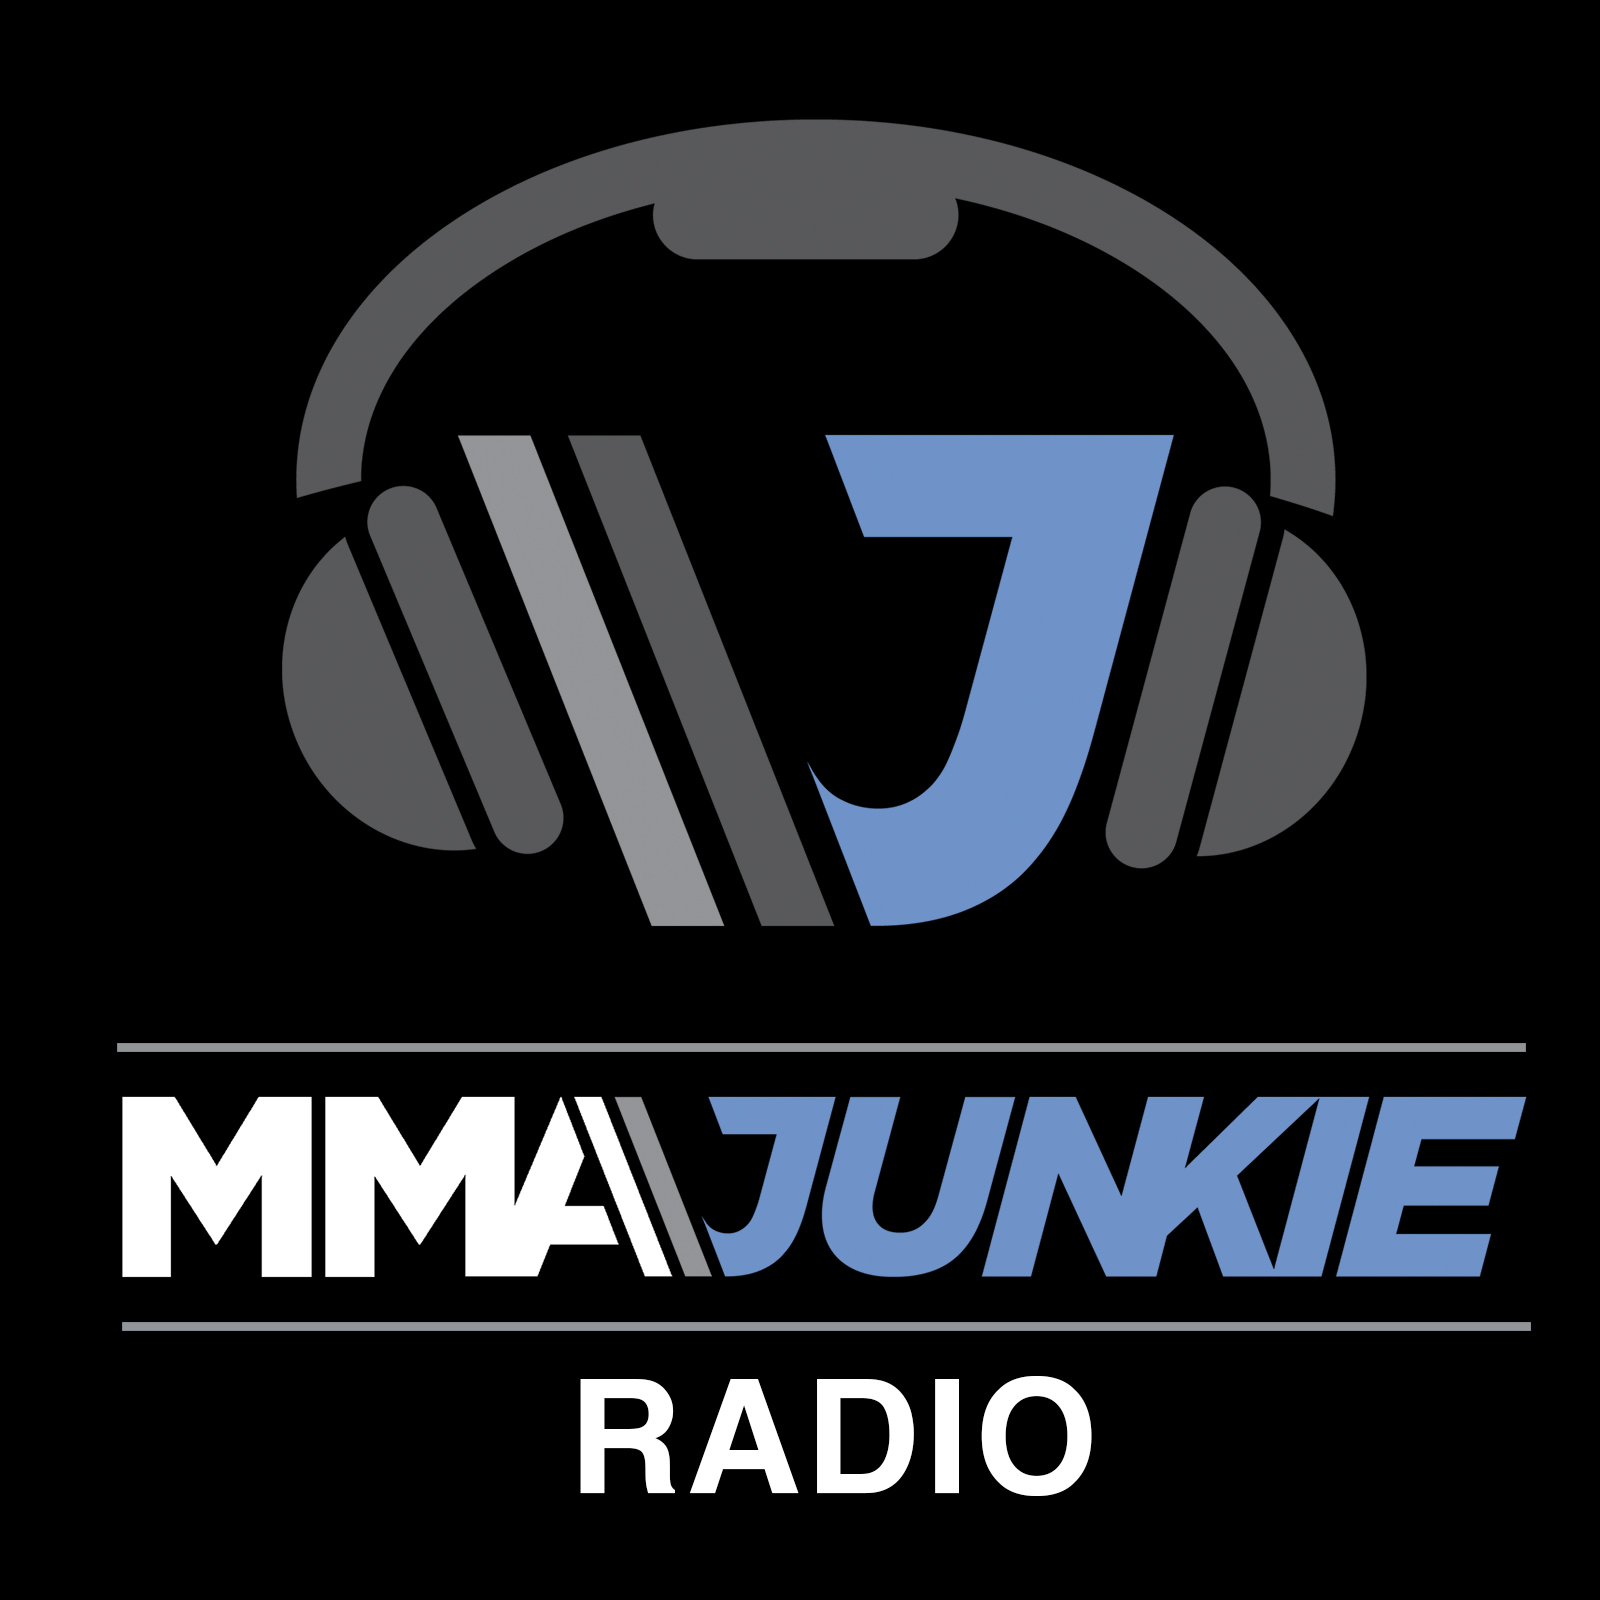 Ep. #3130 with guests John Morgan and Victoria Lee, UFC 258 preview, more